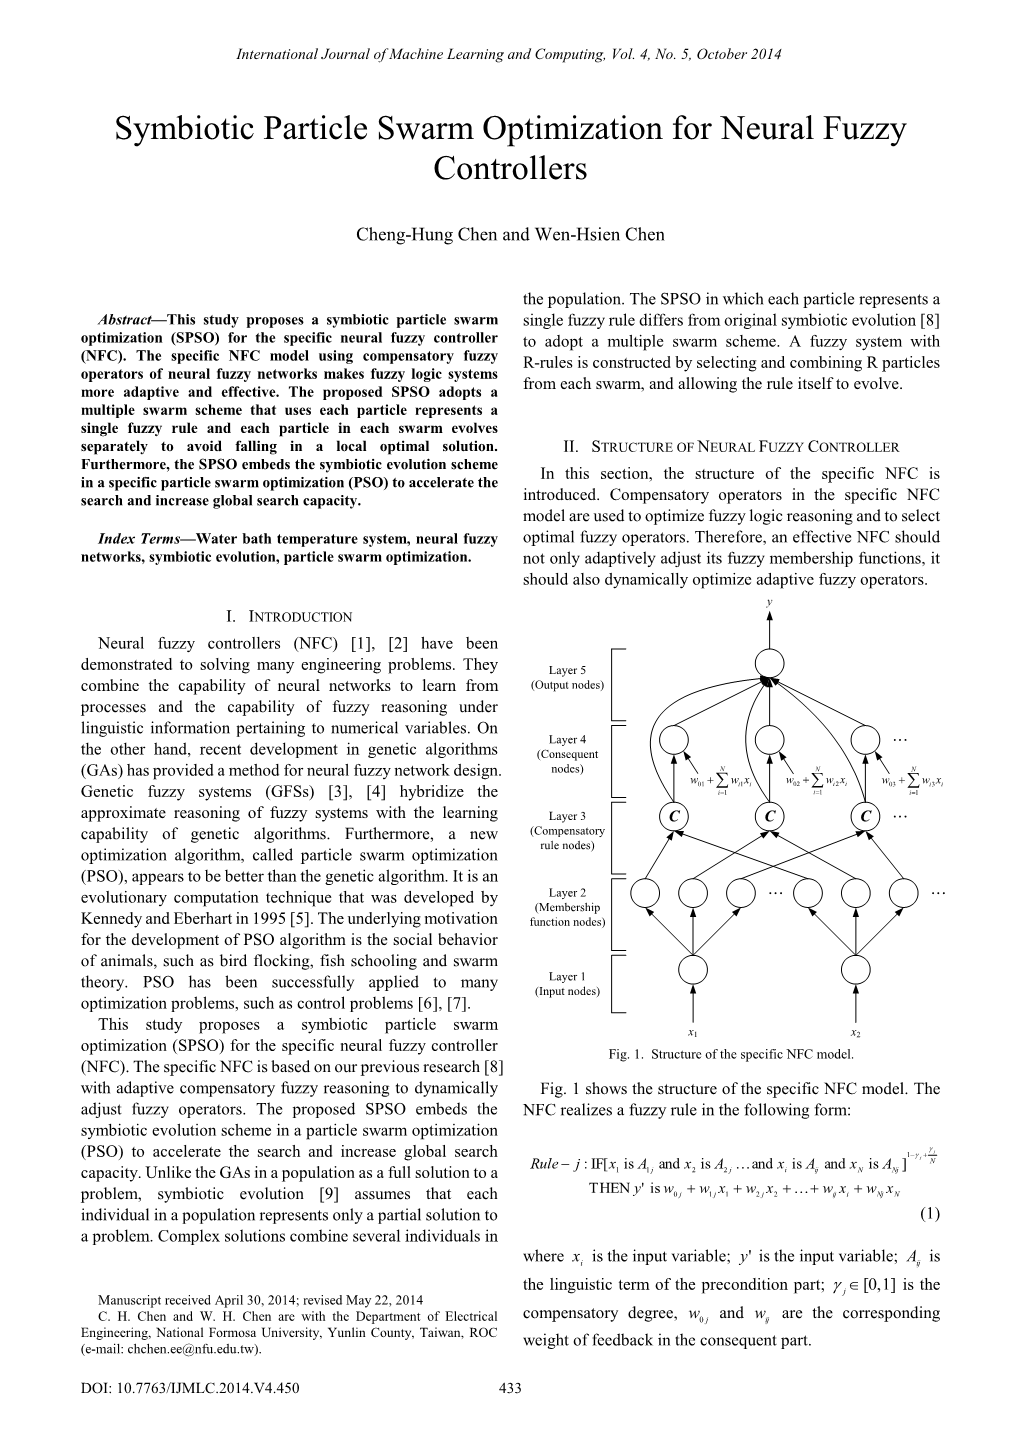 Symbiotic Particle Swarm Optimization for Neural Fuzzy Controllers